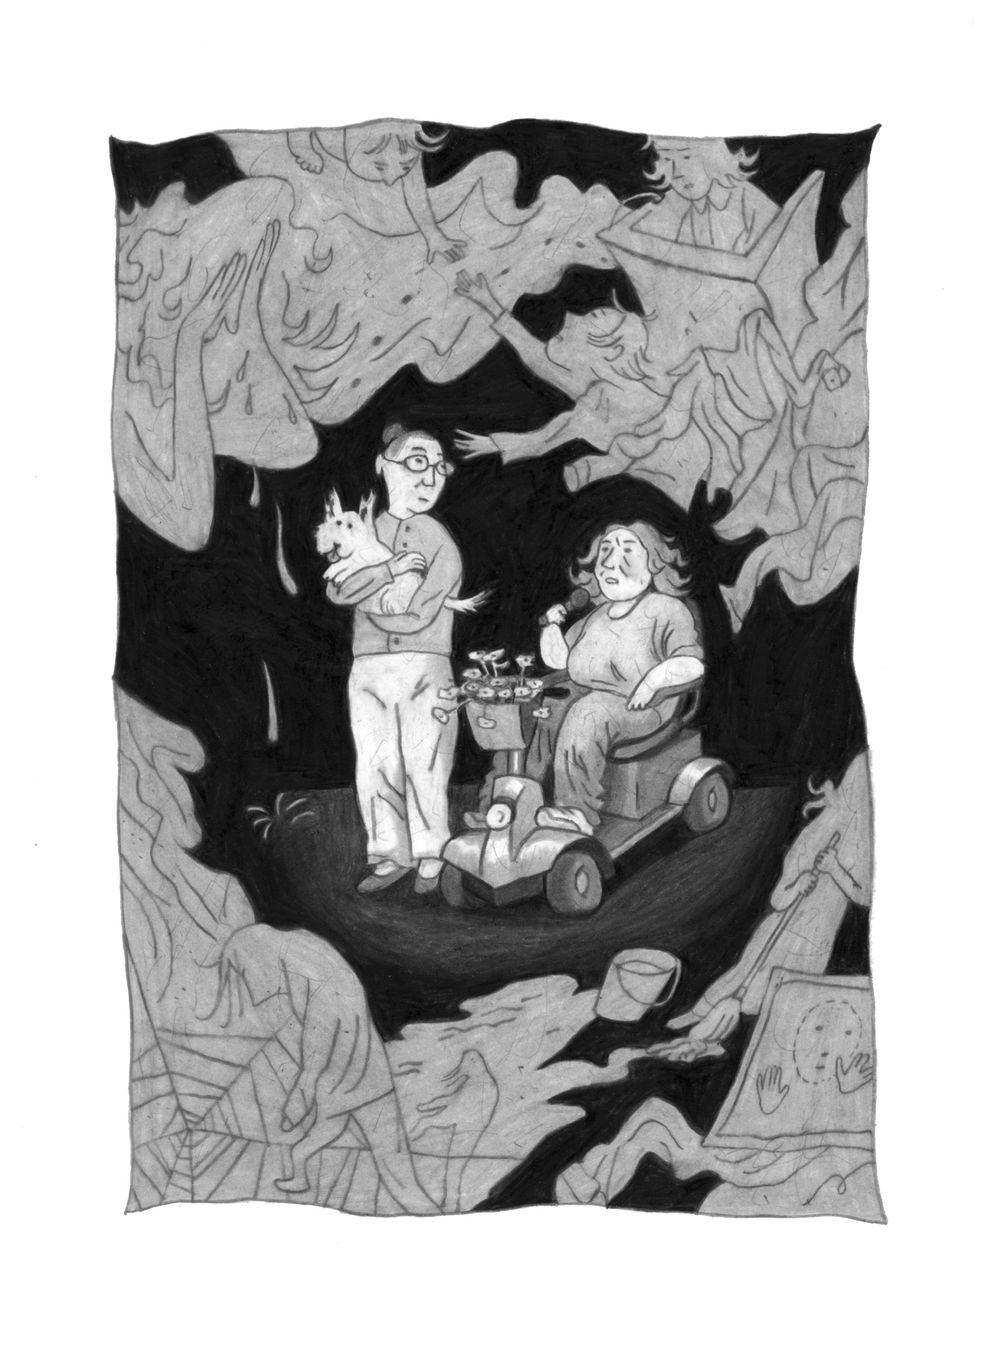 Black and white illustration of Pat Seth in a scooter chair and Marie Slark holding a dog in her arms.